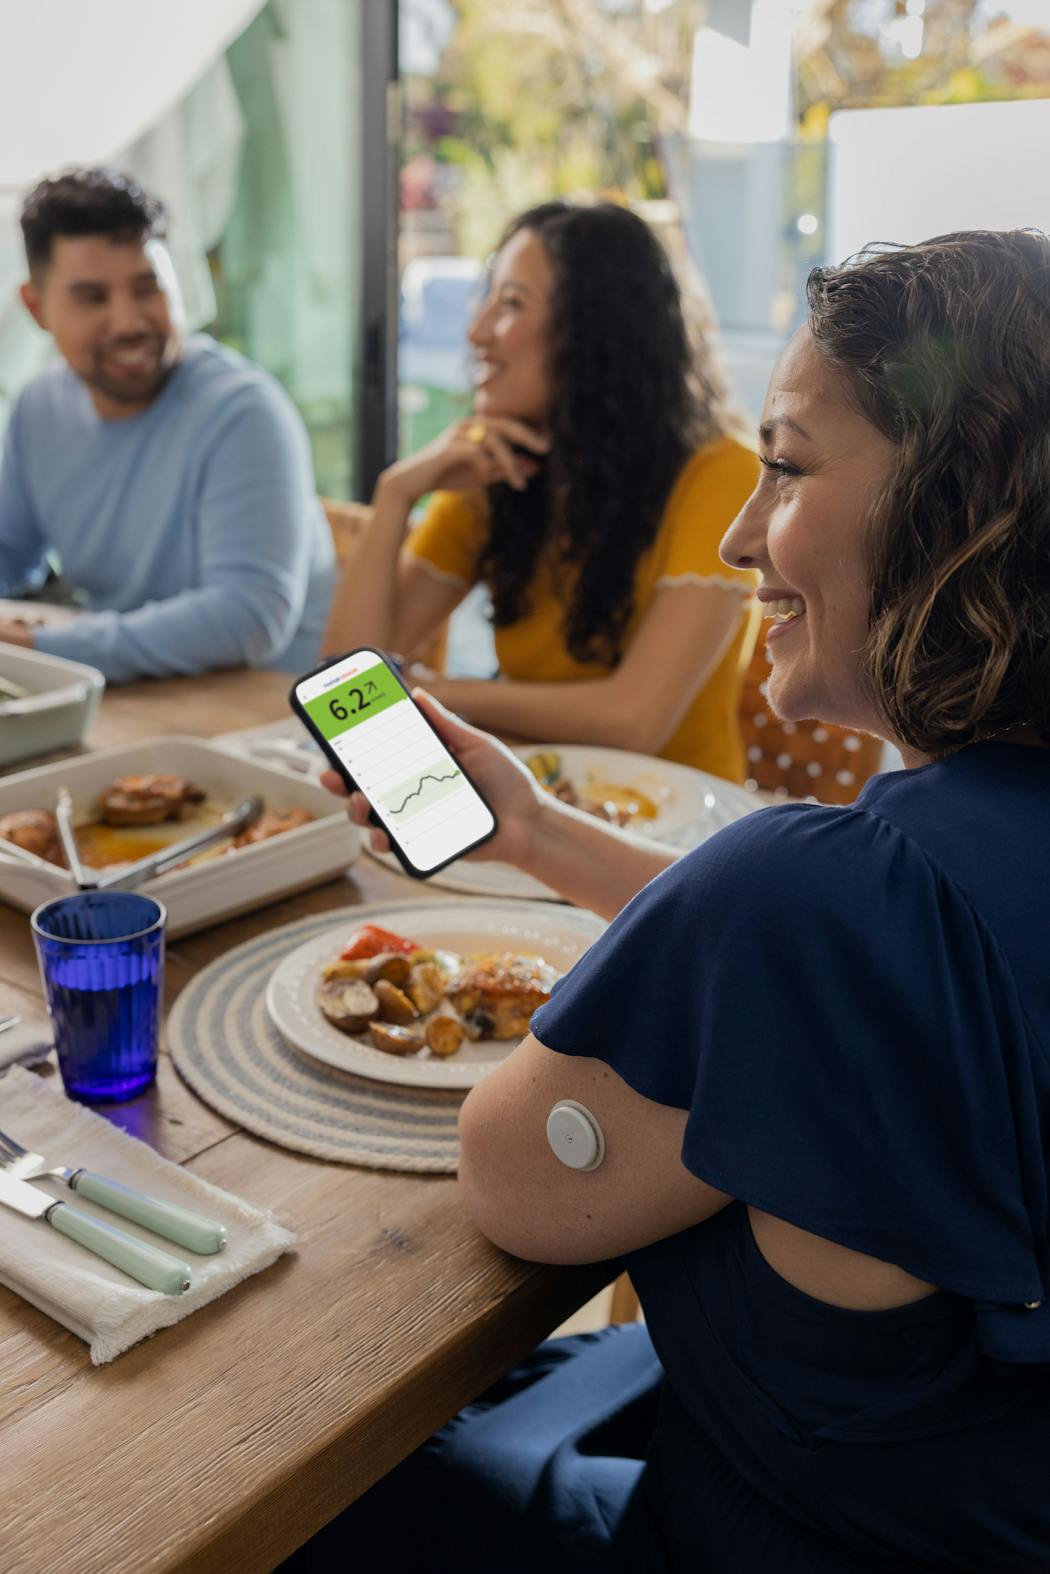 Abbott’s FreeStyle Libre 2 CGM system includes a mobile app for monitoring one’s blood sugar using a sensor attached to the skin. 